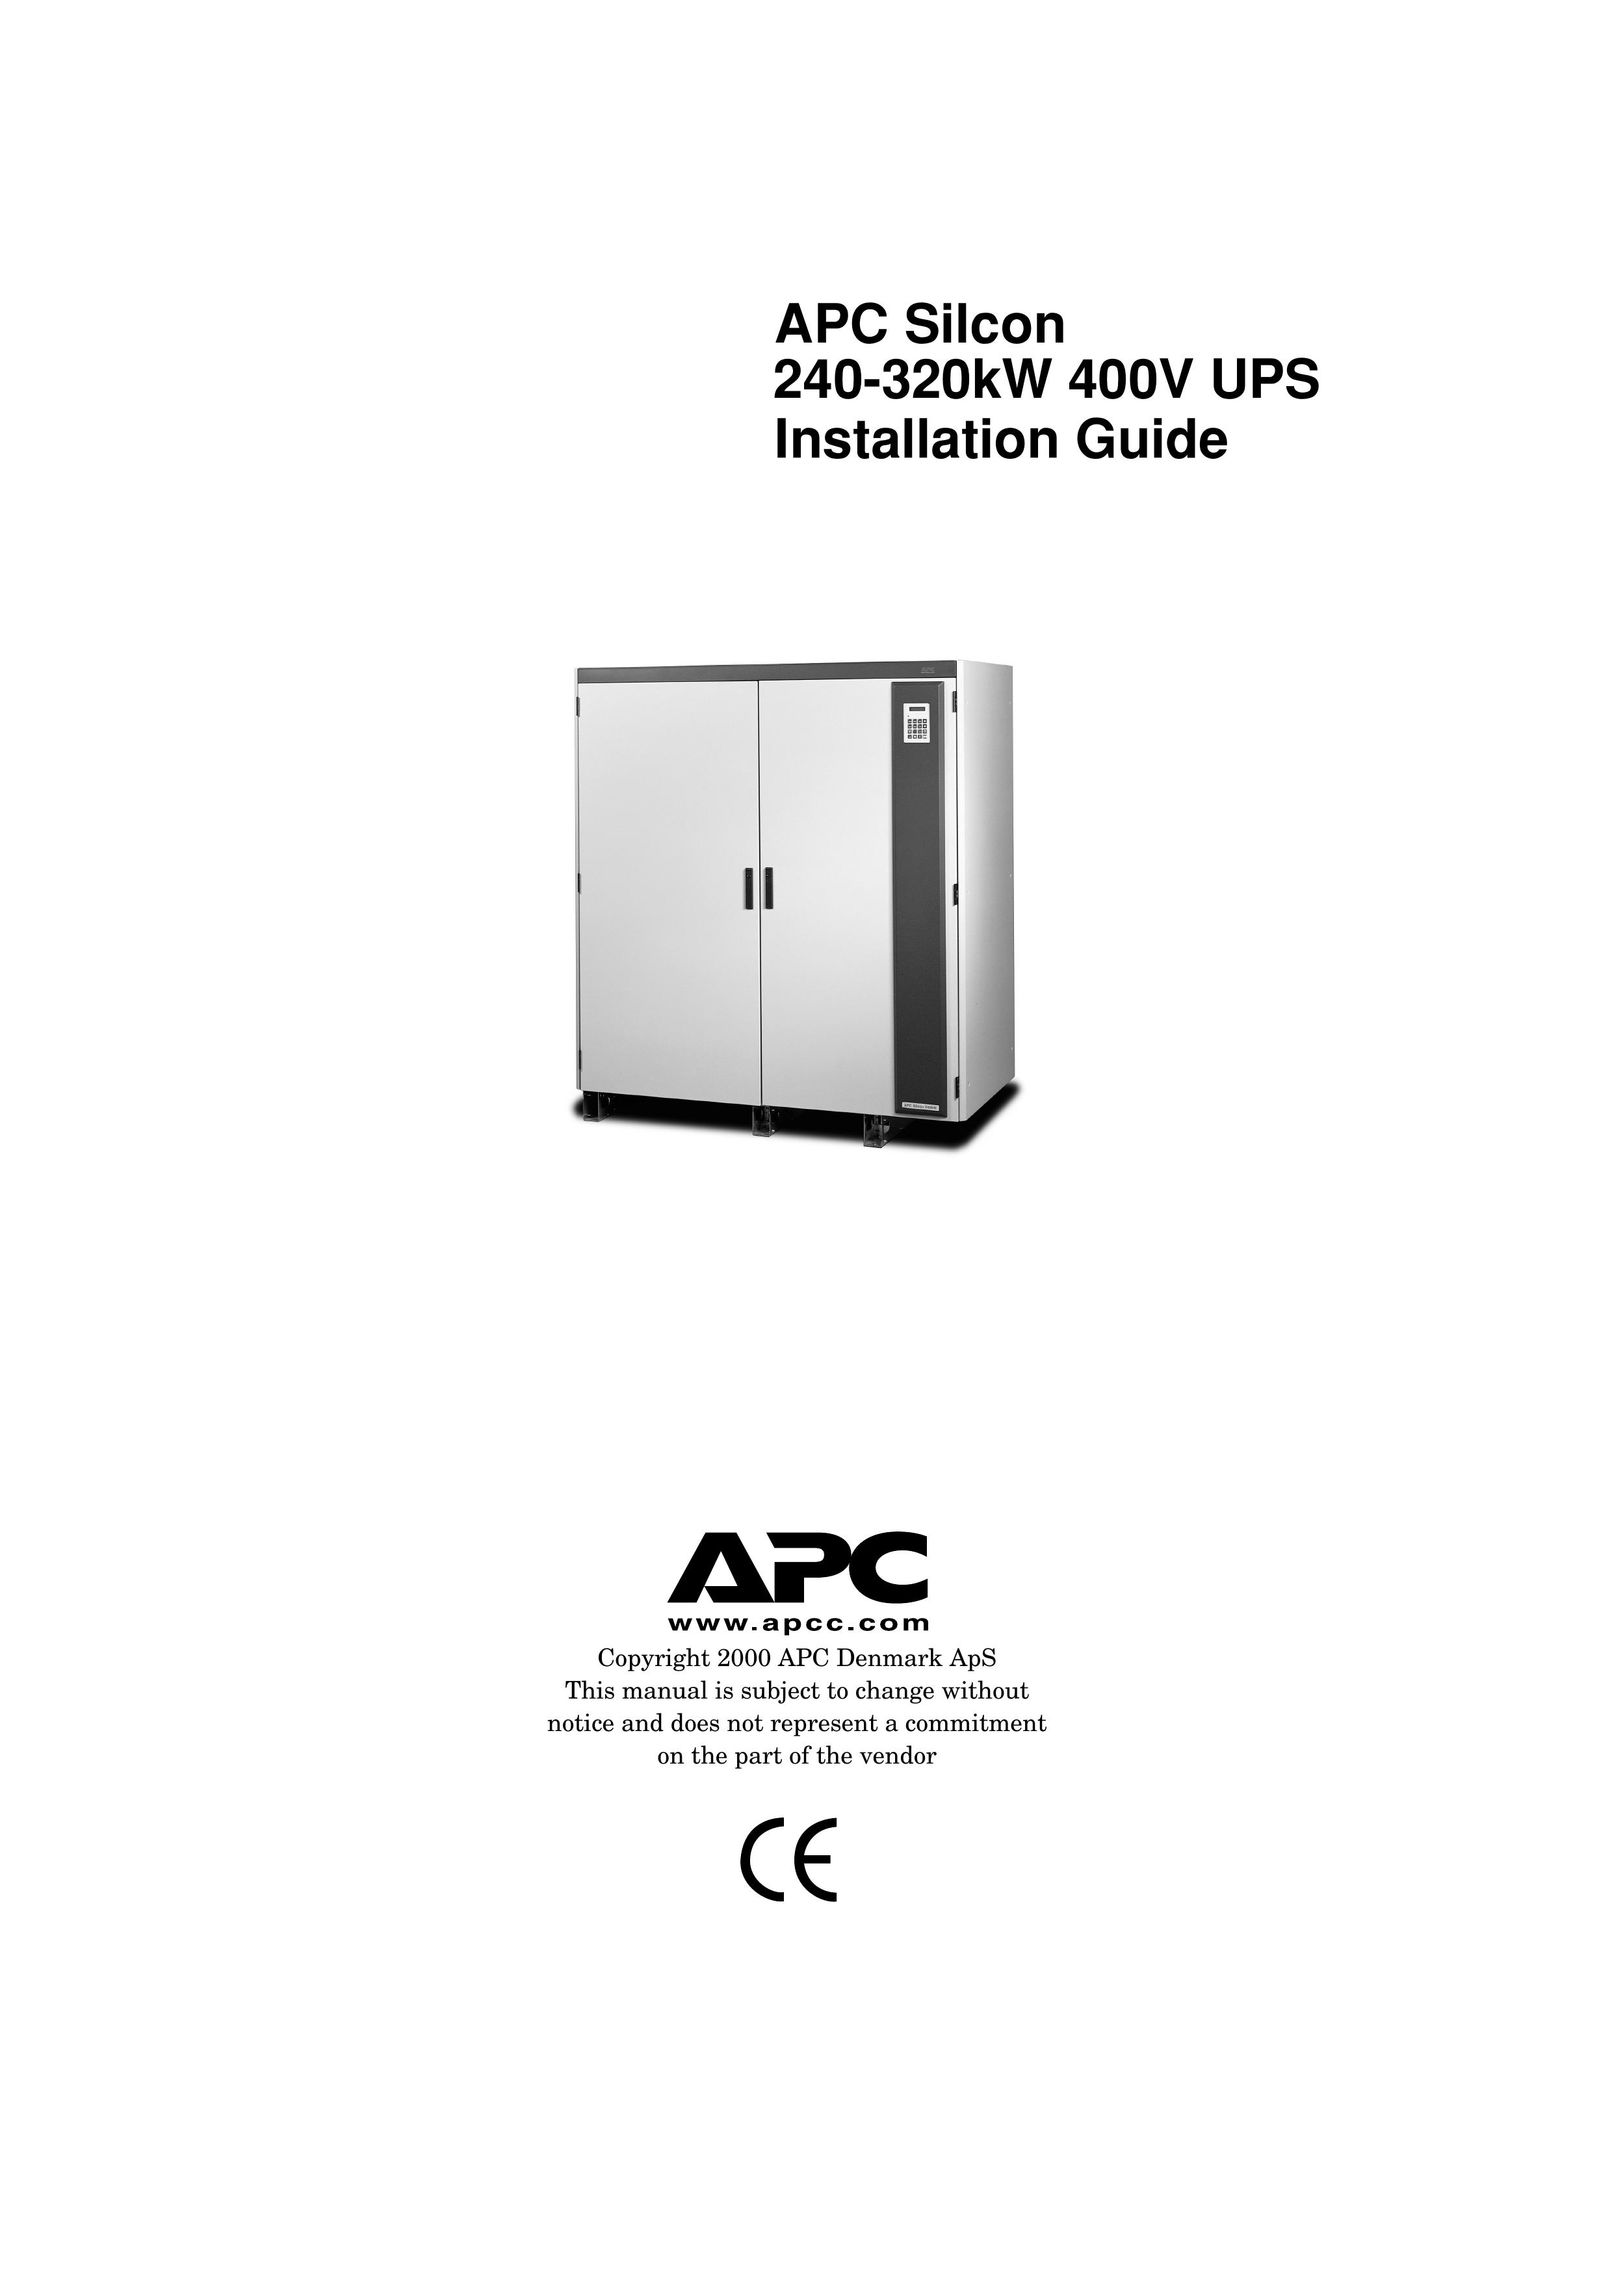 American Power Conversion 240-320kW 400V Power Supply User Manual